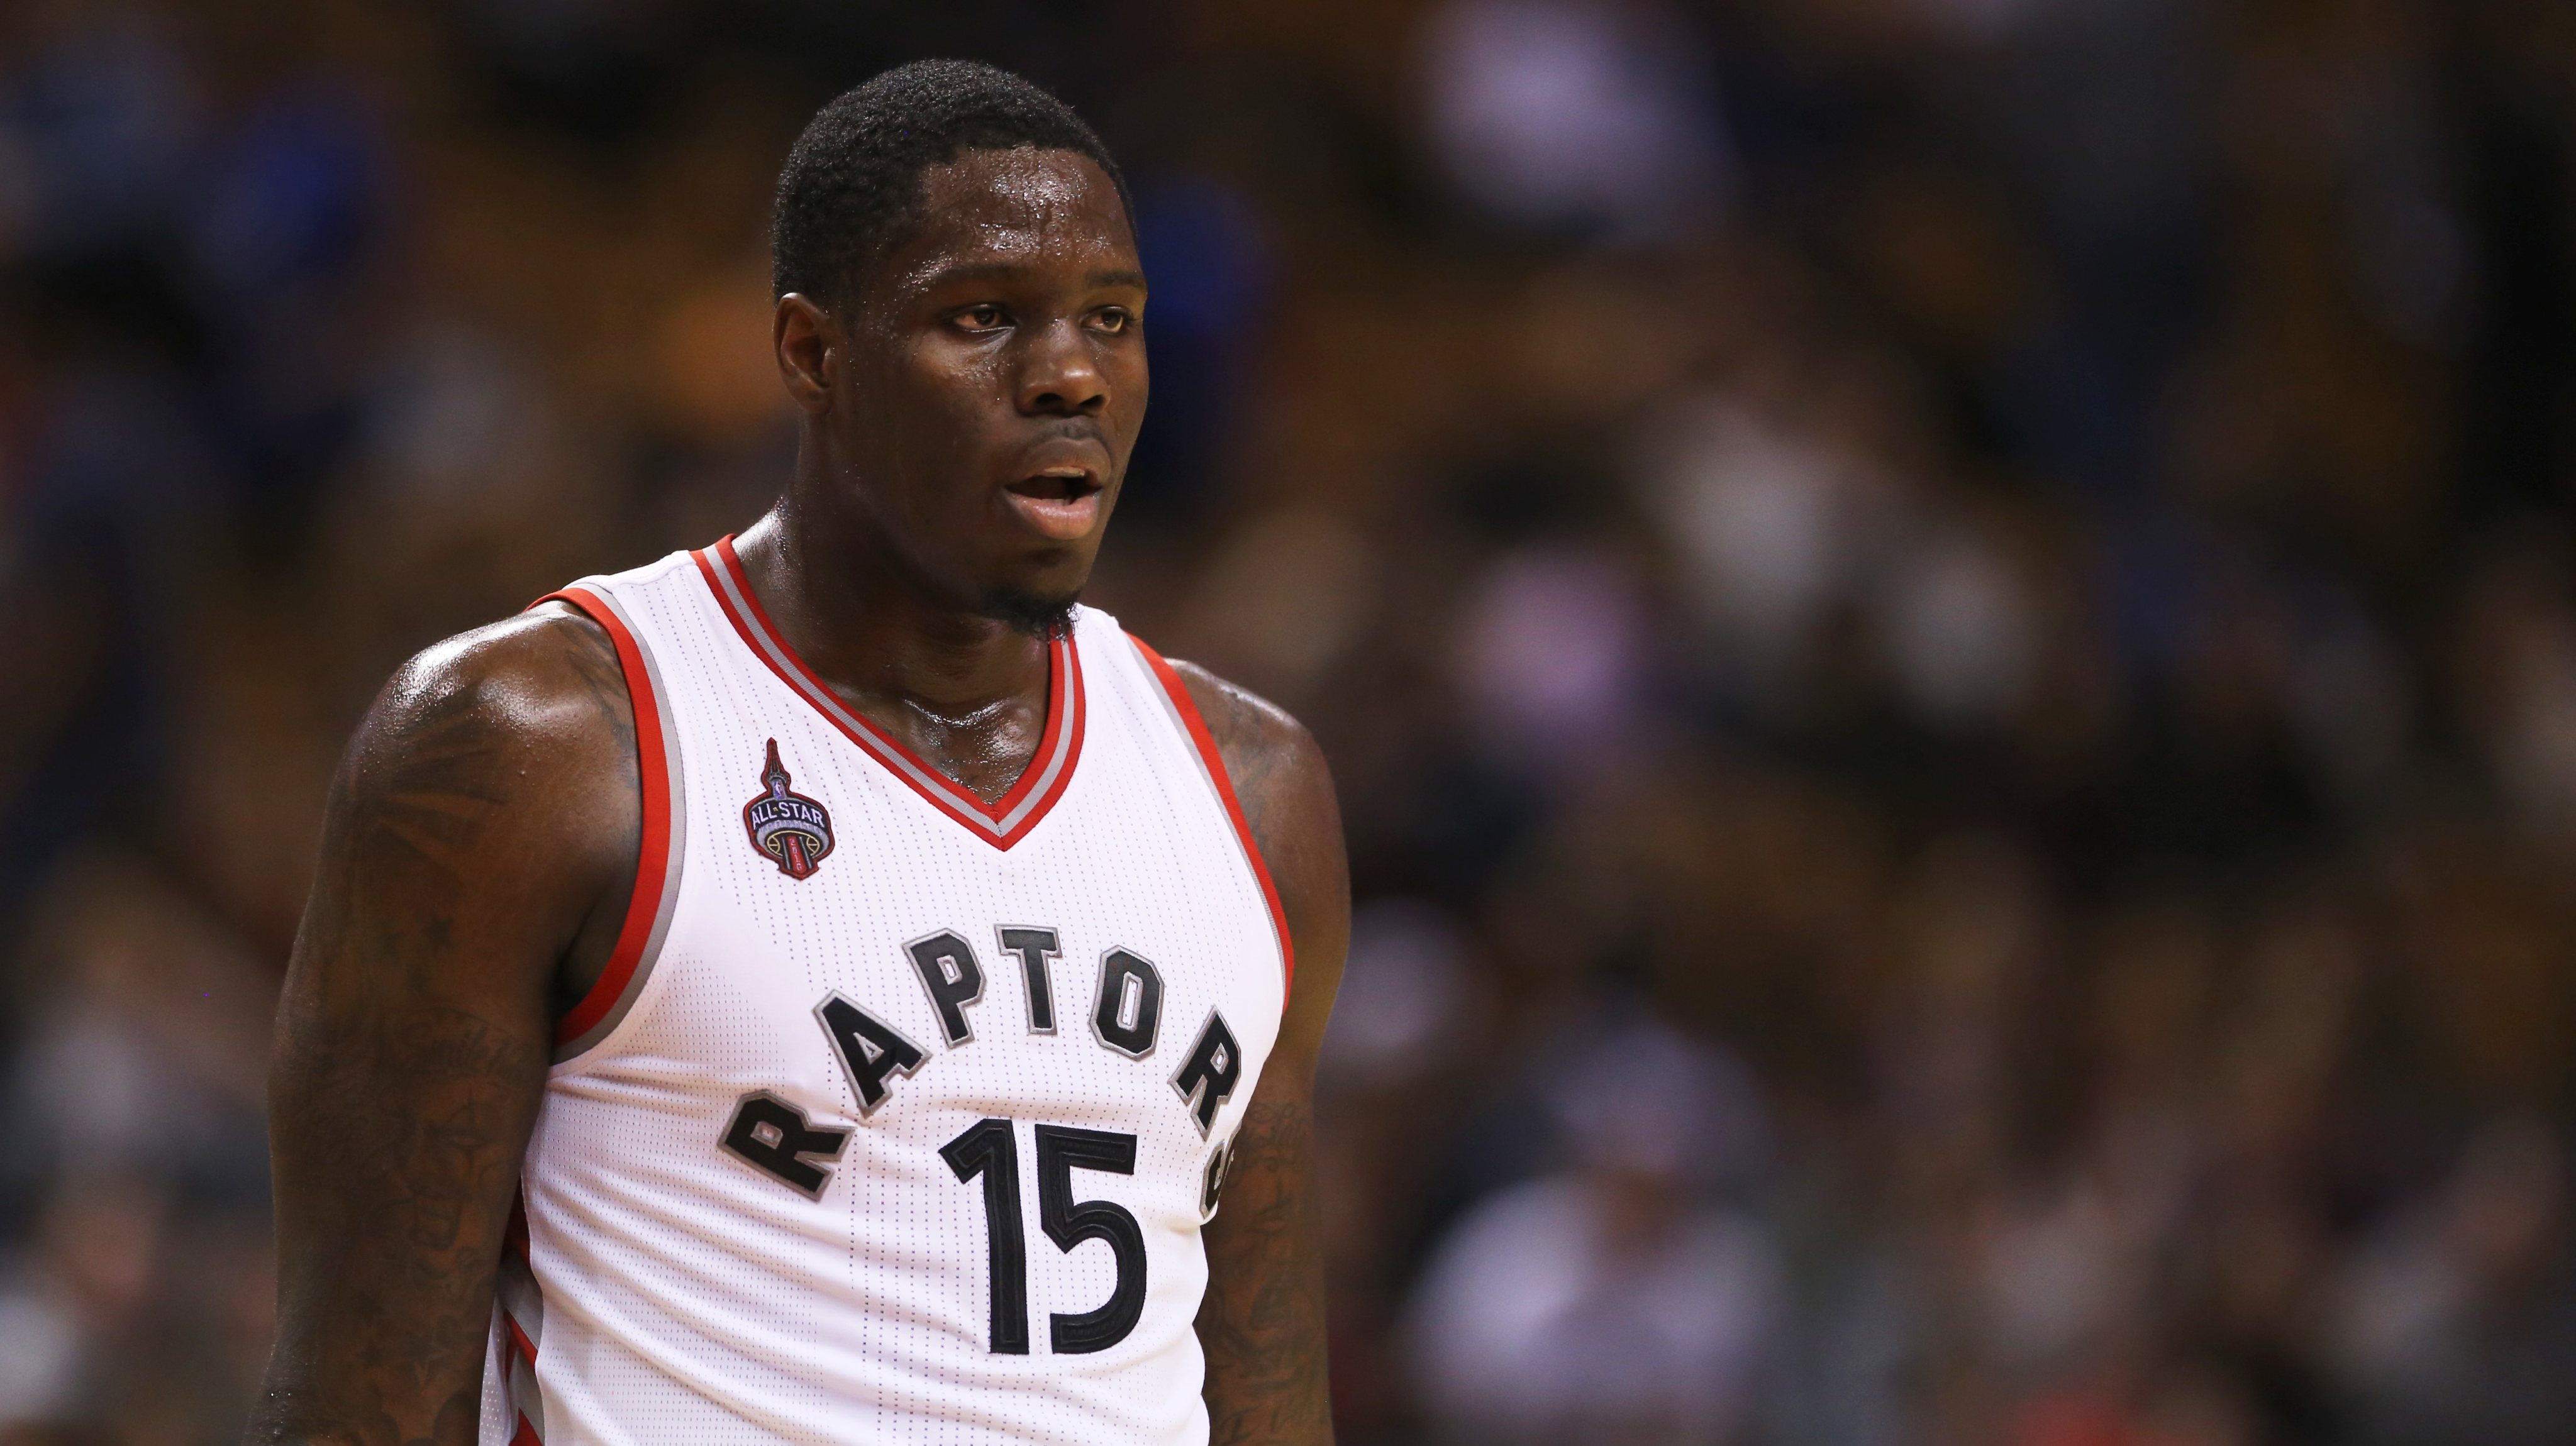 Toronto Raptors Anthony Bennett during a NBA preseason game against the Minnesota Timberwolves at the Air Canada Centre.